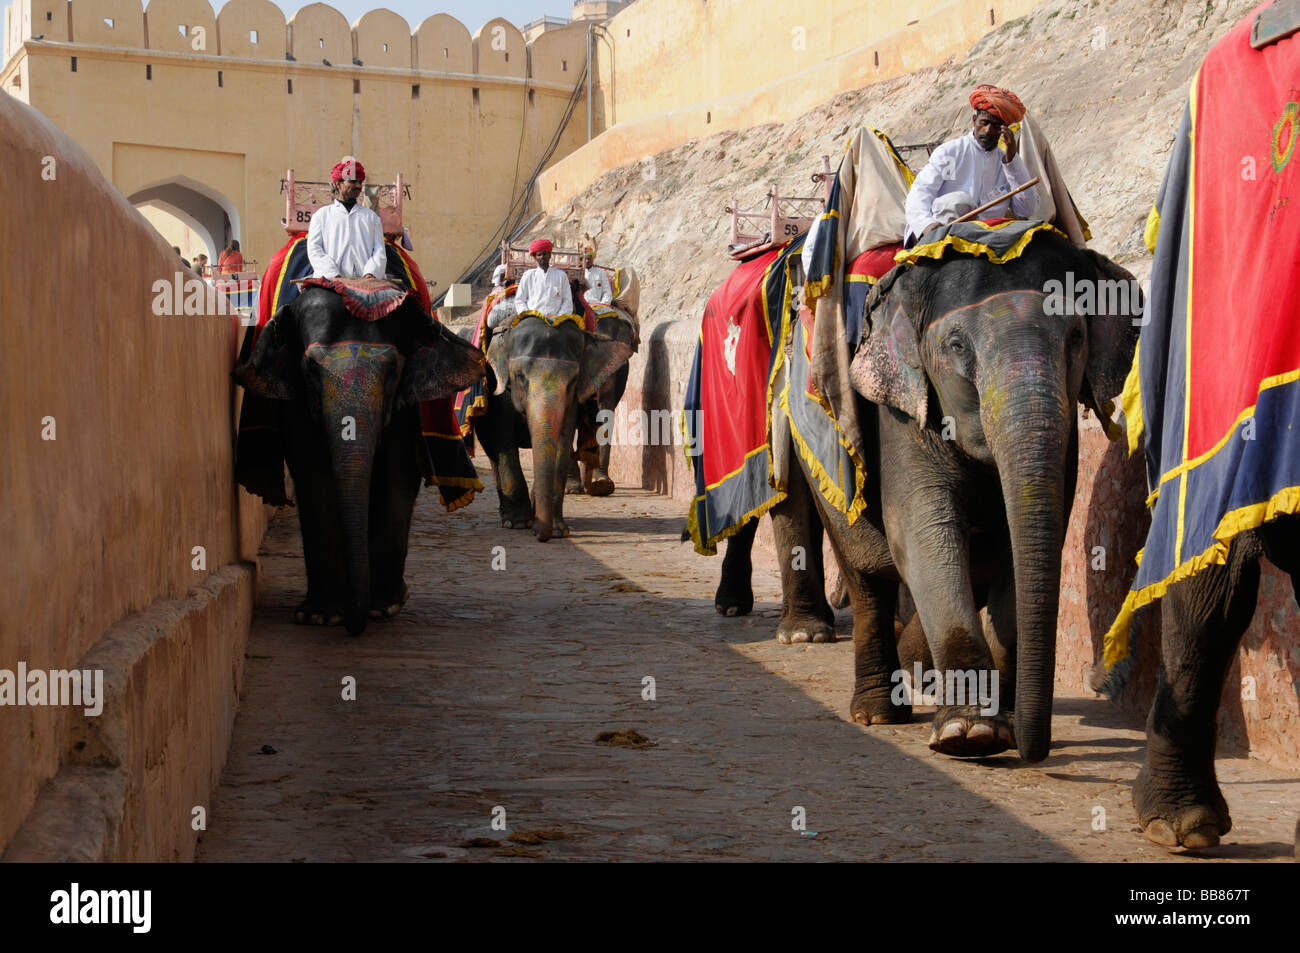 Riding on elephants to the Fort Amber Palace, Amber, Rajasthan, North India, Asia Stock Photo